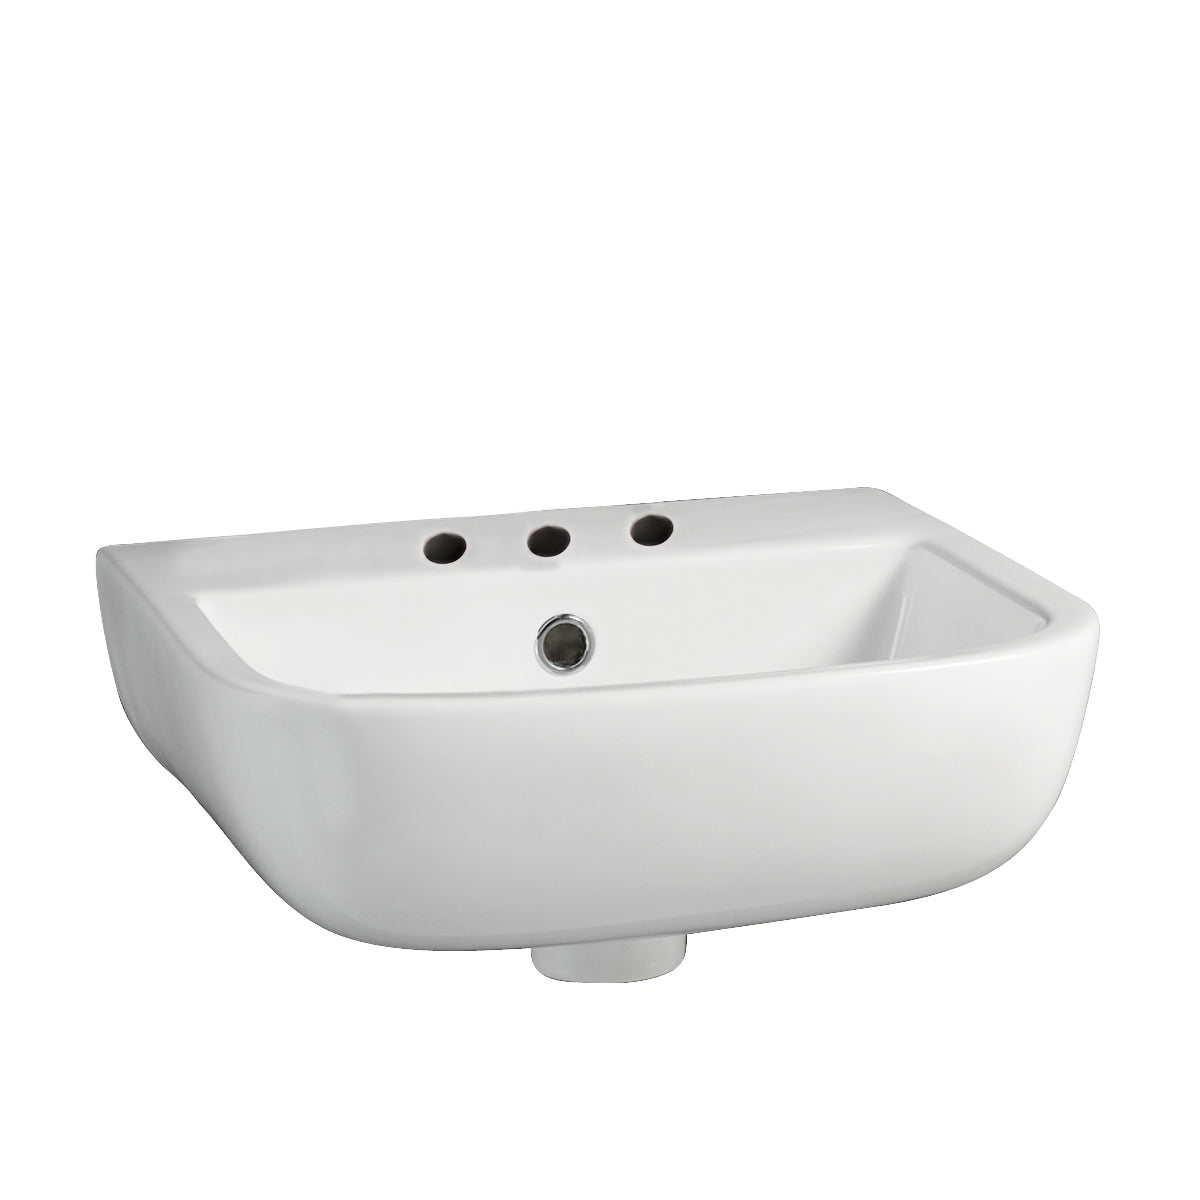 Series 600 Small Wall Hung Sink 15 3/4" for 4" Centerset White